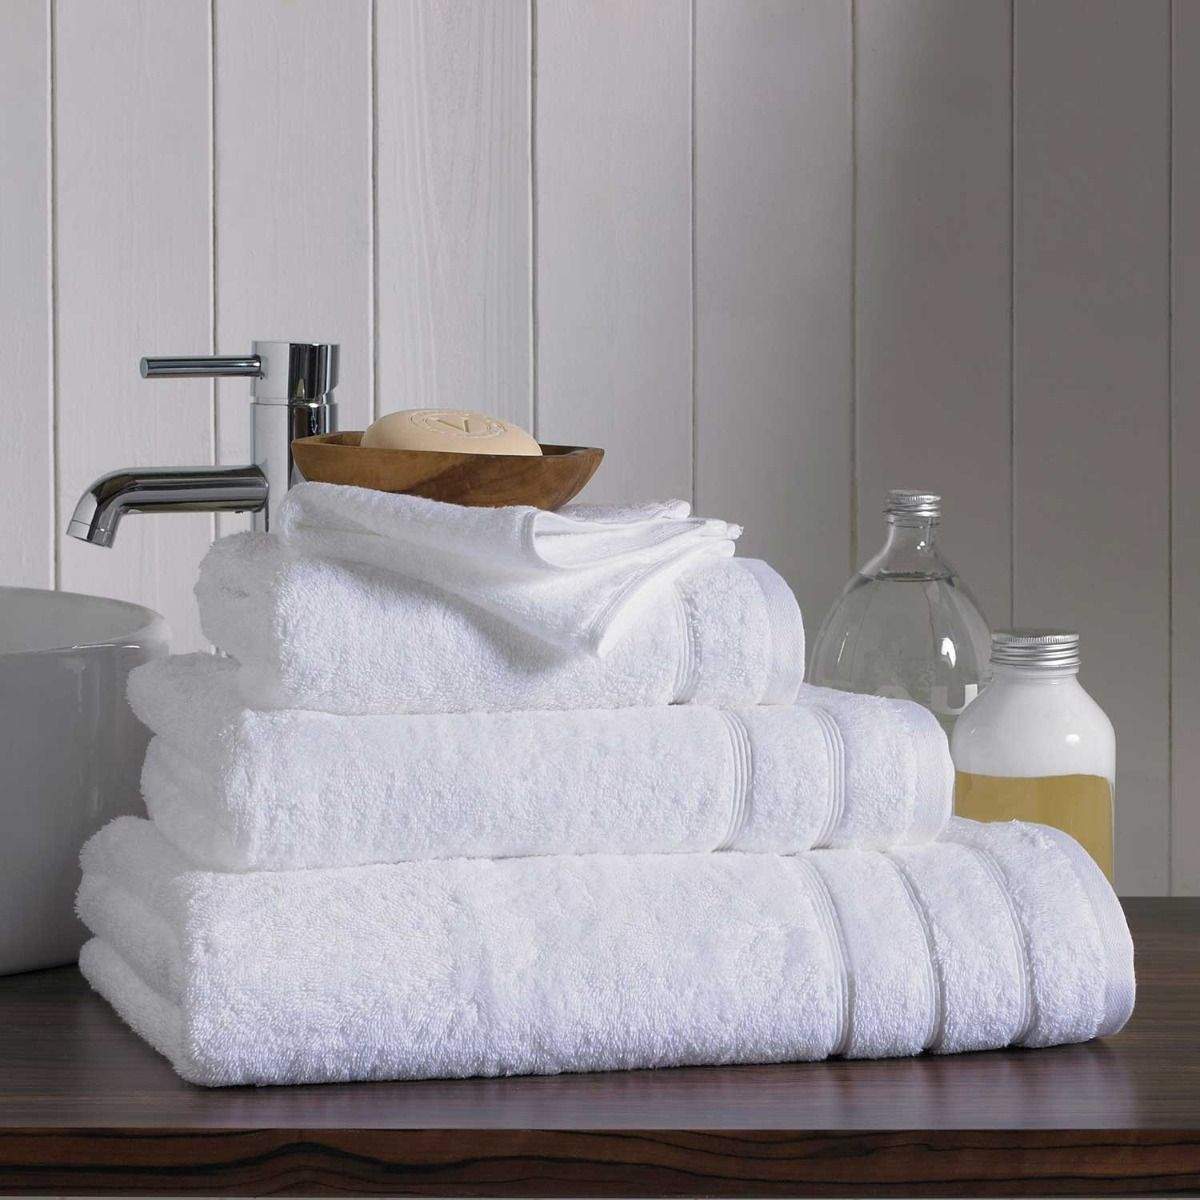 Towel pack For bath